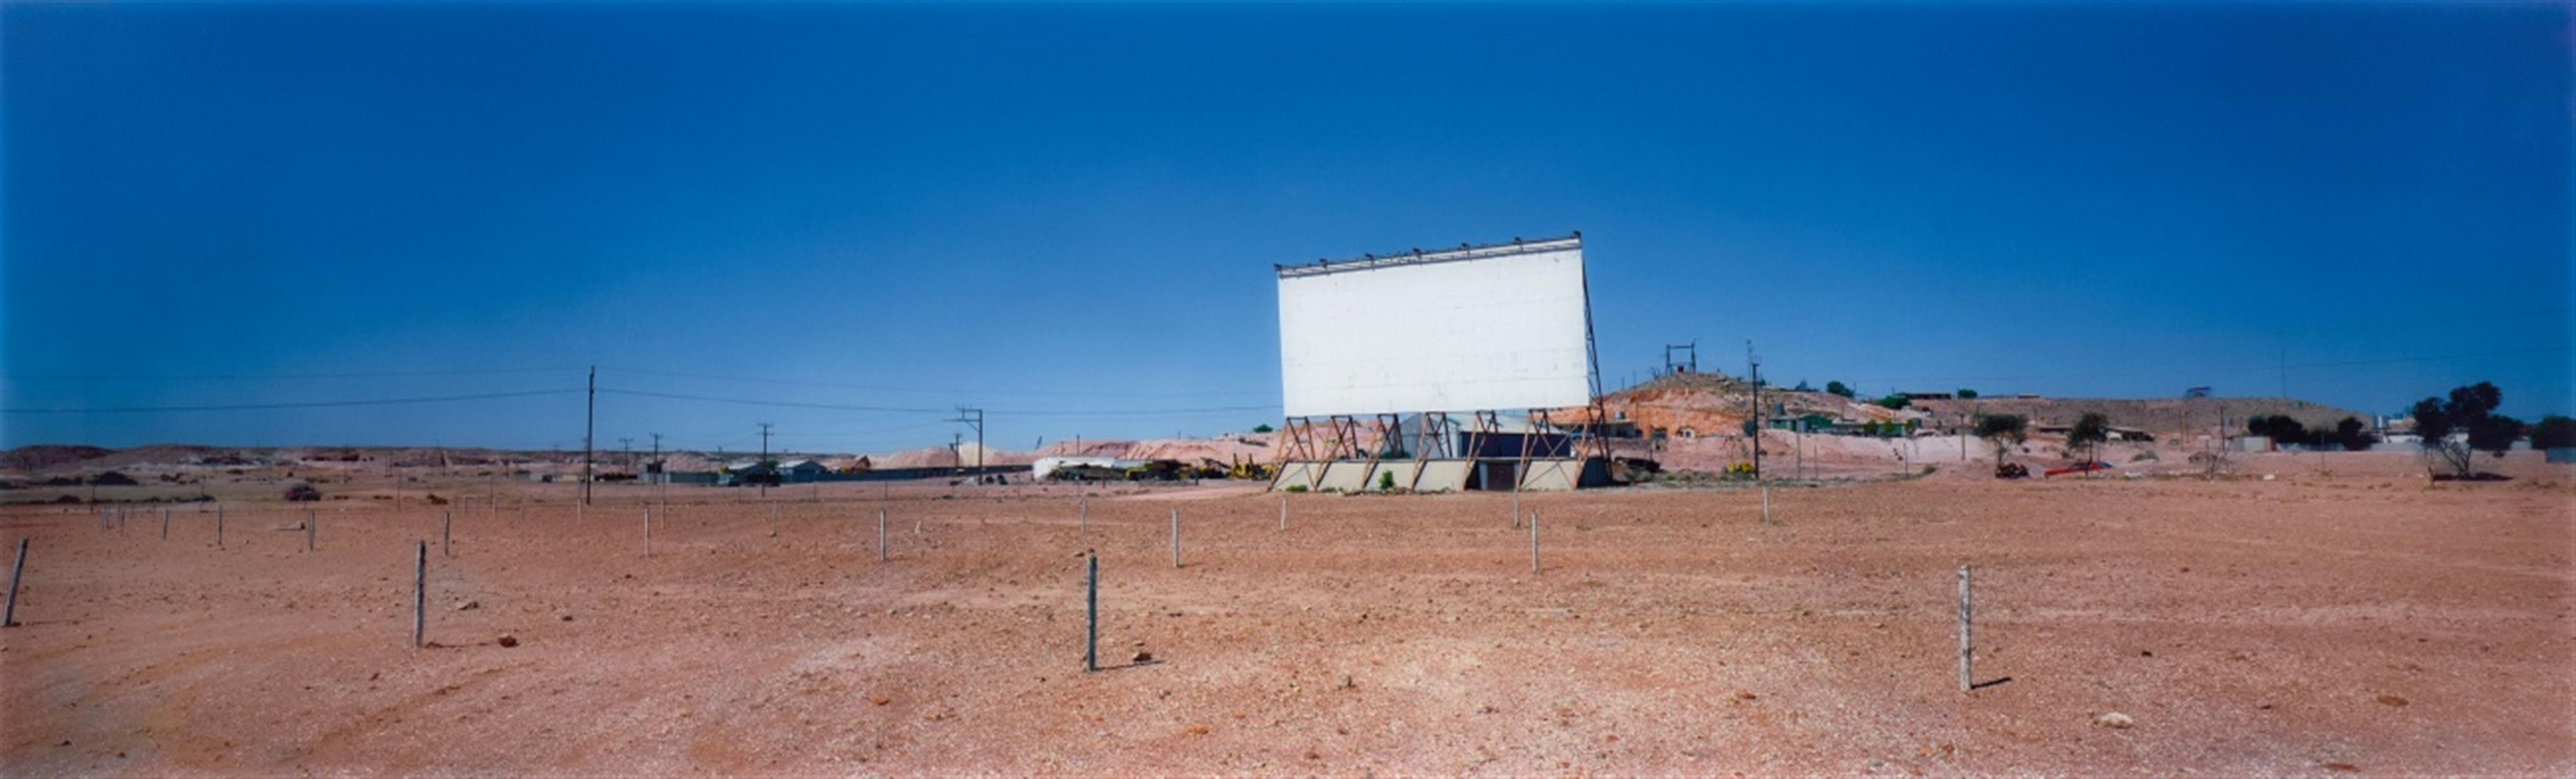 Wim Wenders - The Old Drive-In Theatre, Coober Pedy, Australien - image-1